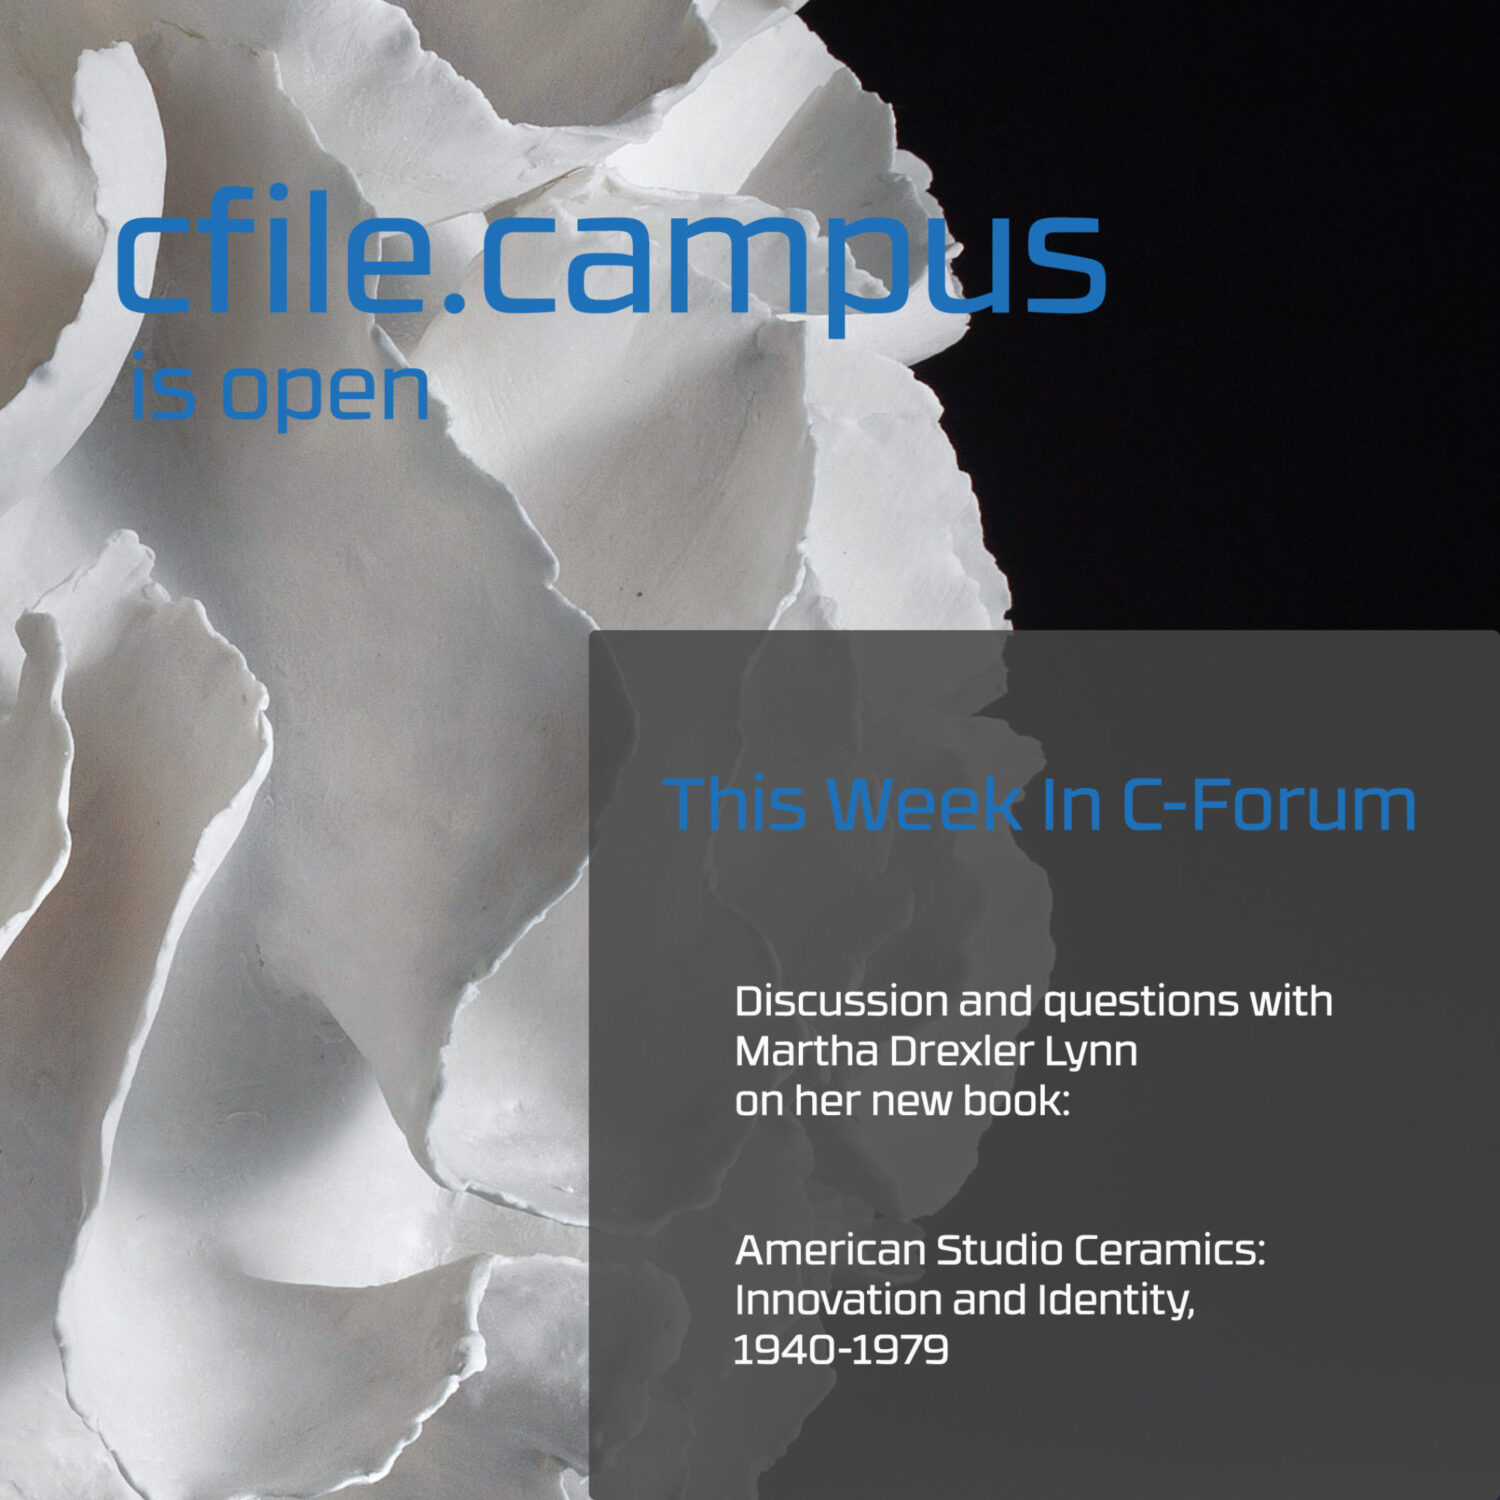 Campus Now Live | Forum Meeting Hall Opens, See Schedule of Guest Author Hosts Q+A